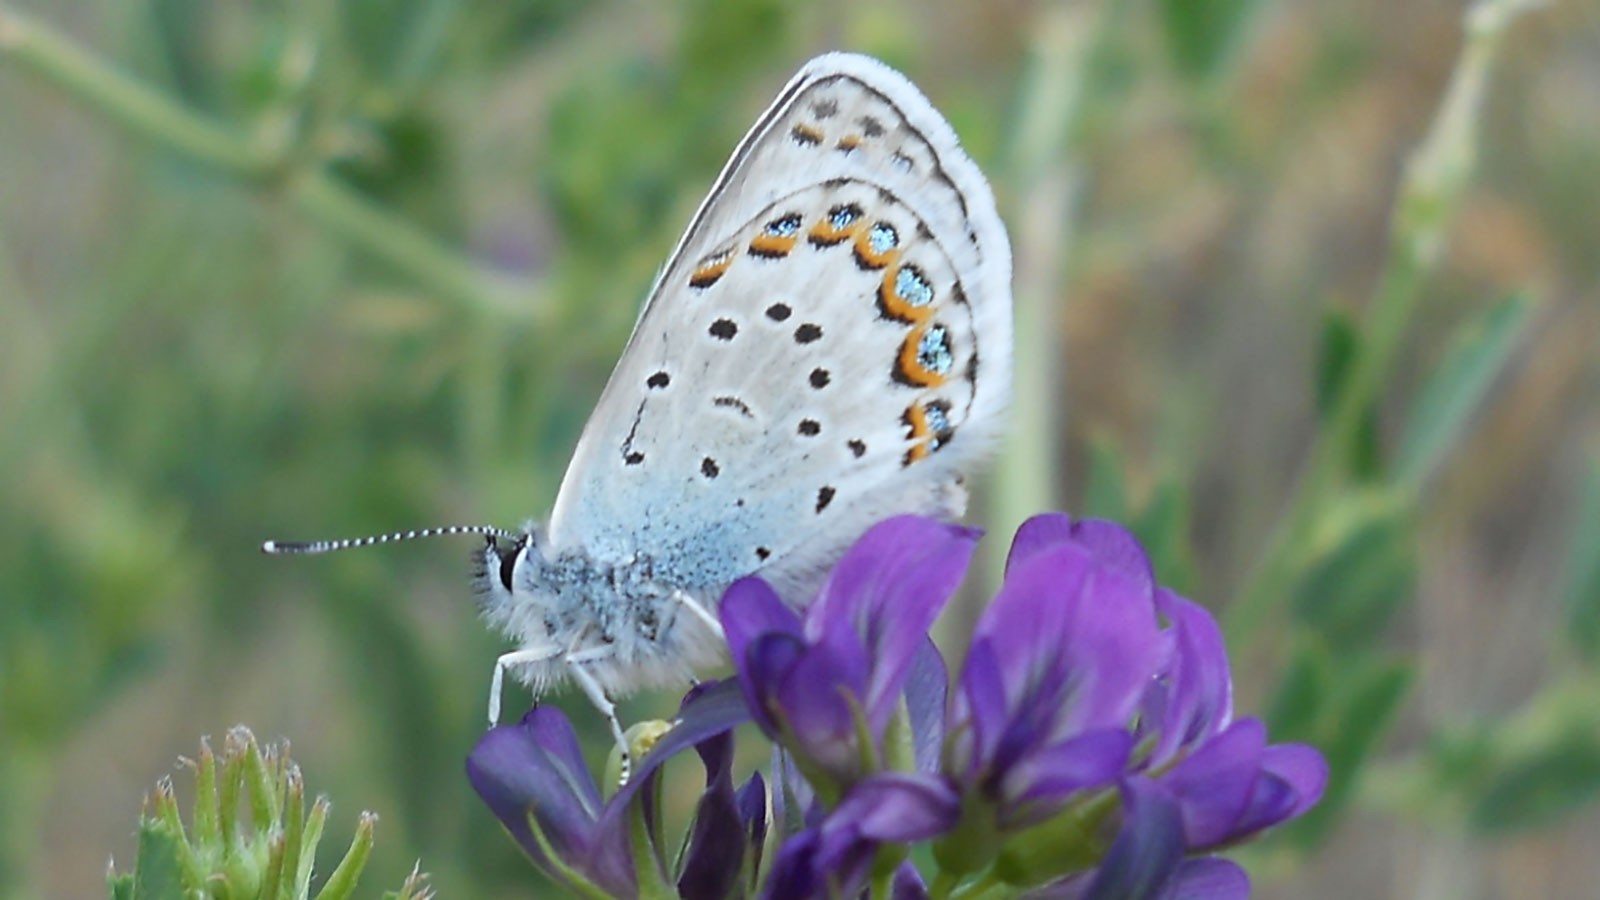 Lycaeides butterfly